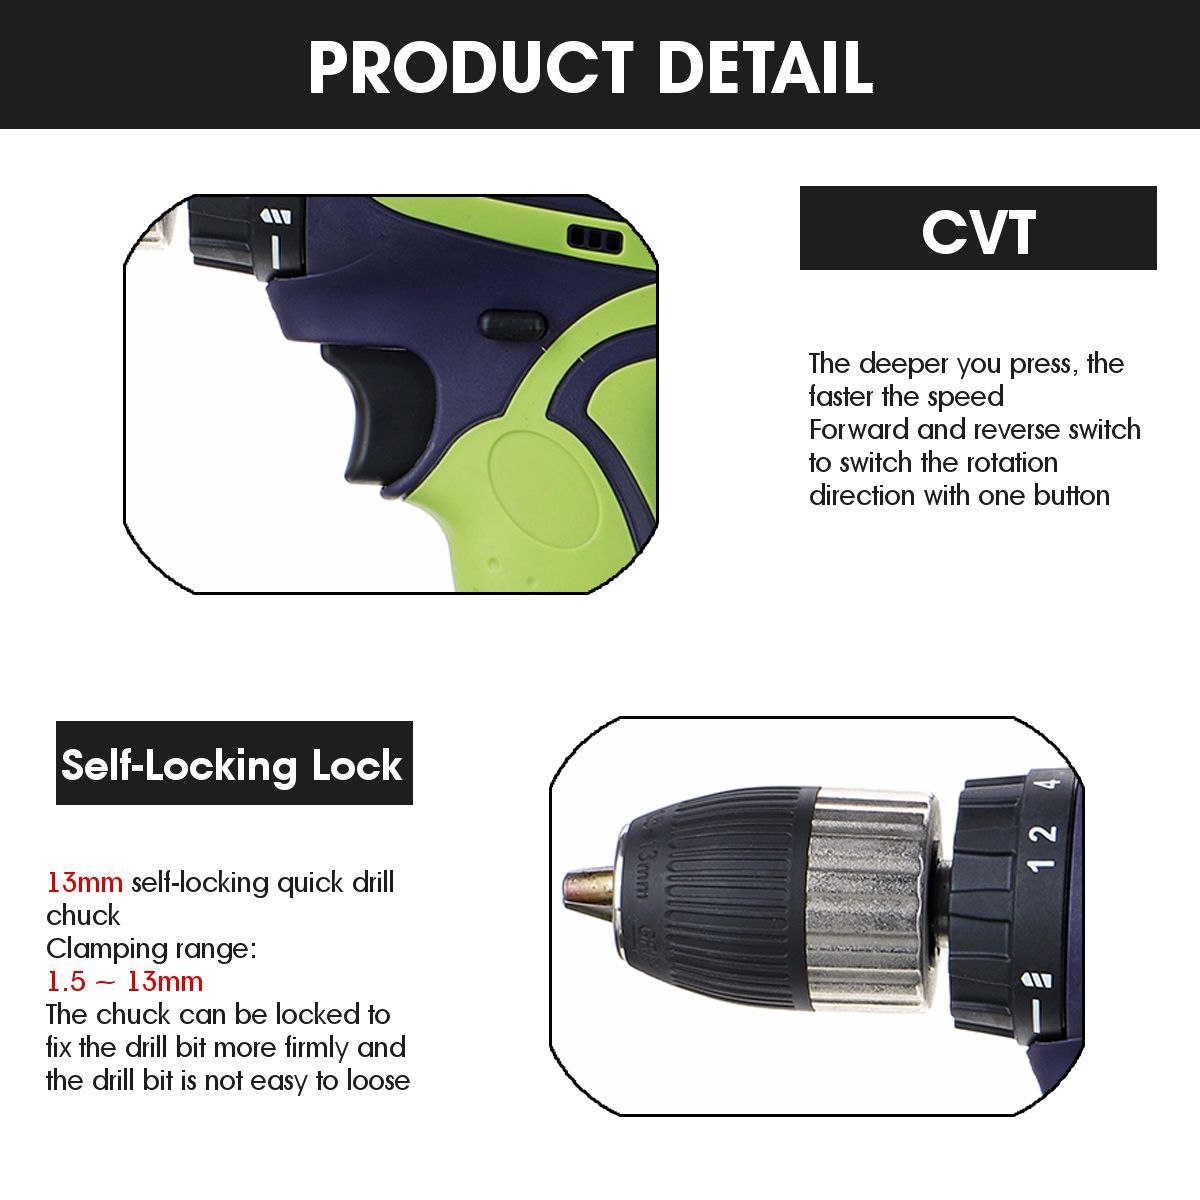 13mm-Chuck-Cordless-Electric-Drill-For-Makita-18V-Battery-4000RPM-LED-Light-Power-Drills-350Nm-1642844